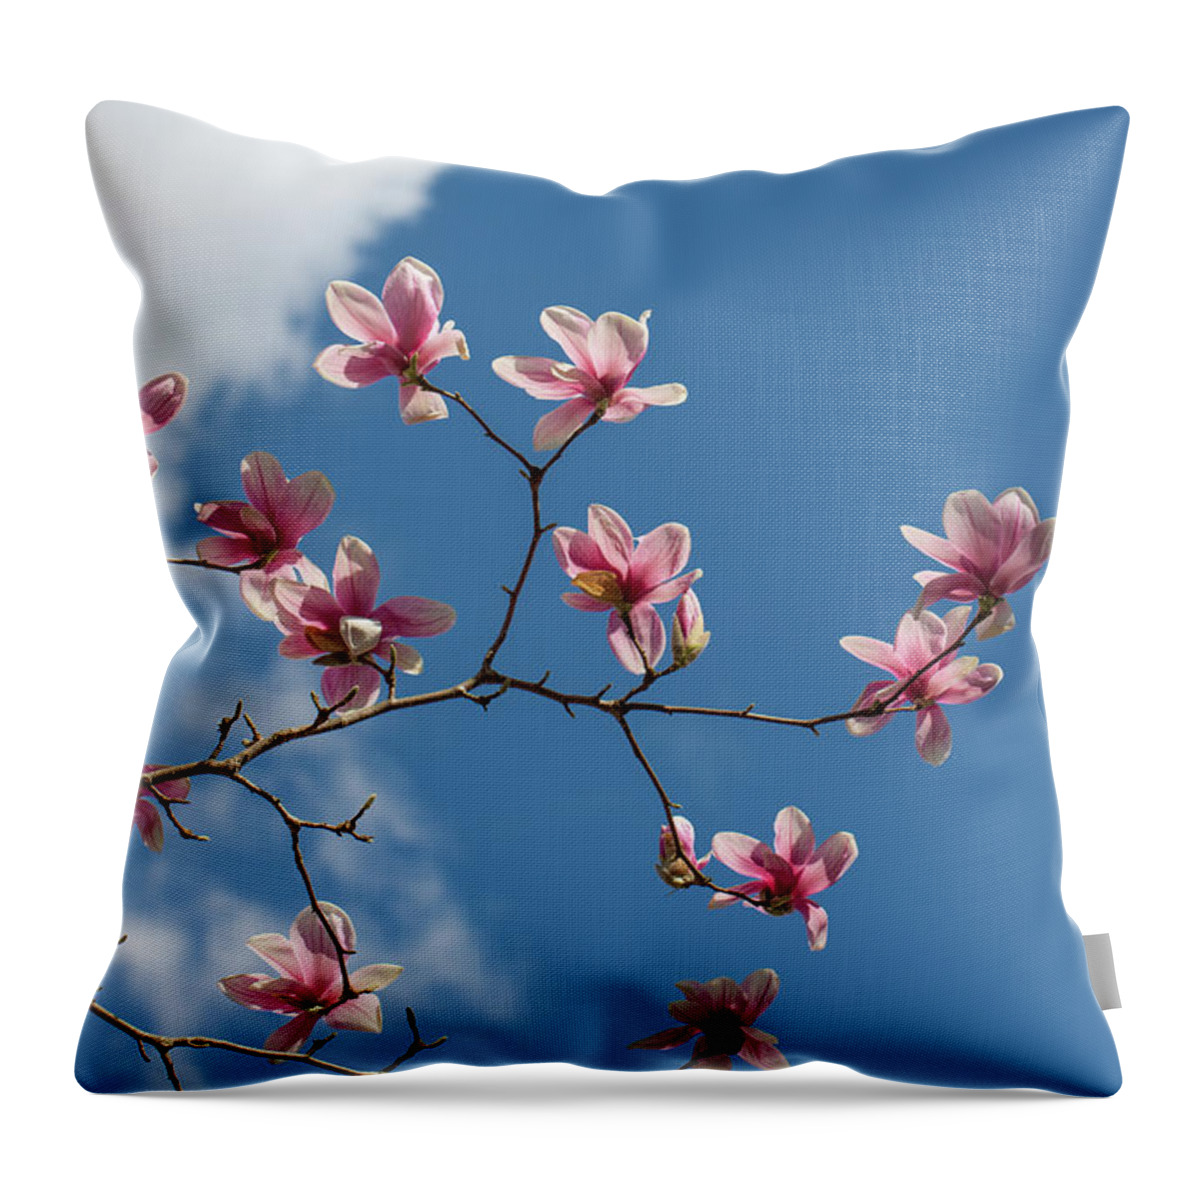 Magnolia Throw Pillow featuring the photograph Beauty Blooms by Sara Hudock